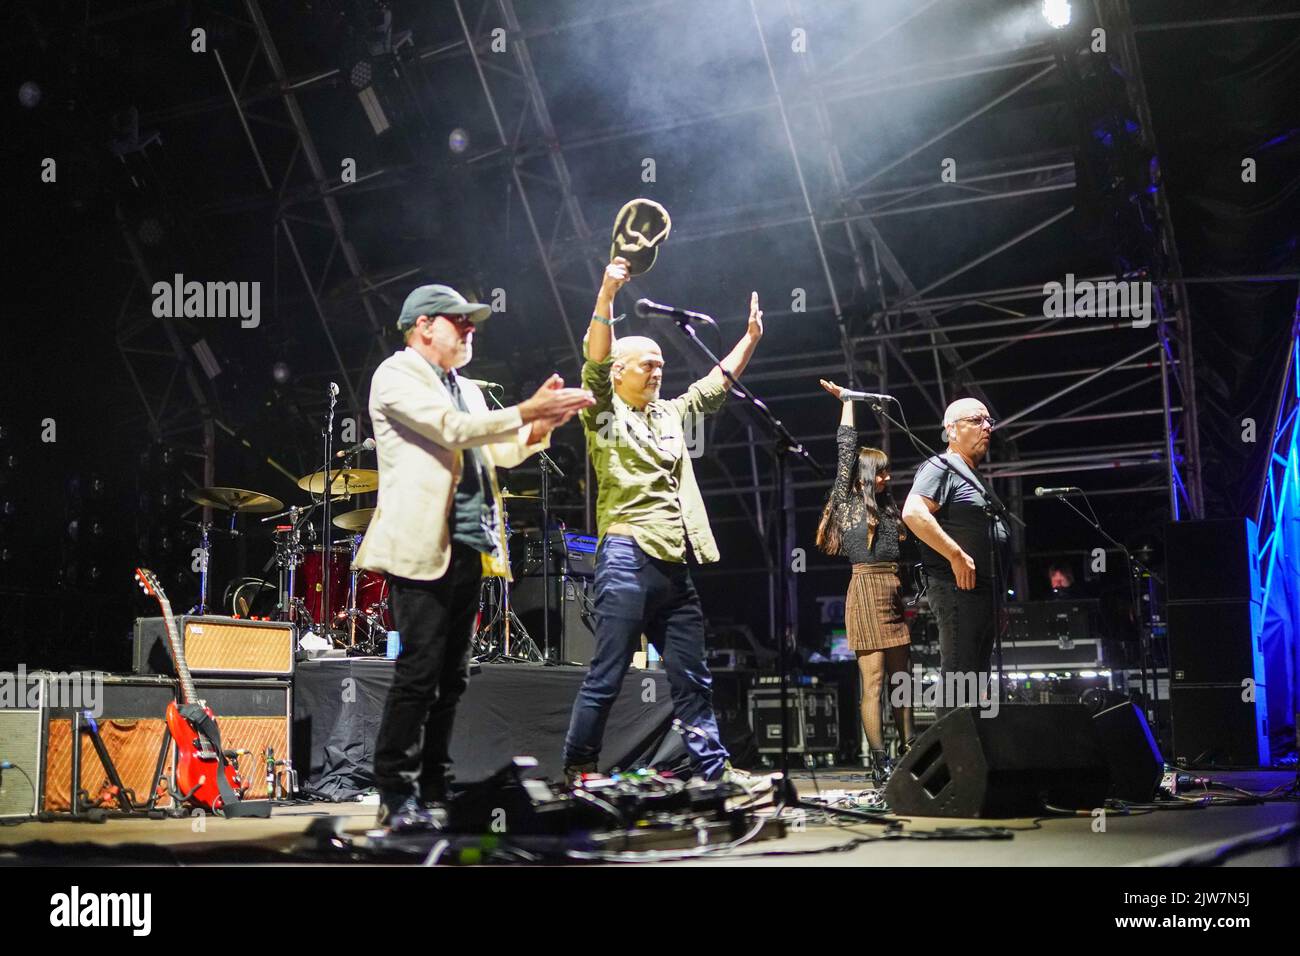 Dorset, UK. Saturday, 3 September, 2022. The Pixies performing at the 2022 edition of the End of the Road festival at Larmer Tree Gardens in Dorset. Photo date: Saturday, September 3, 2022. Photo credit should read: Richard Gray/Alamy Live News Stock Photo